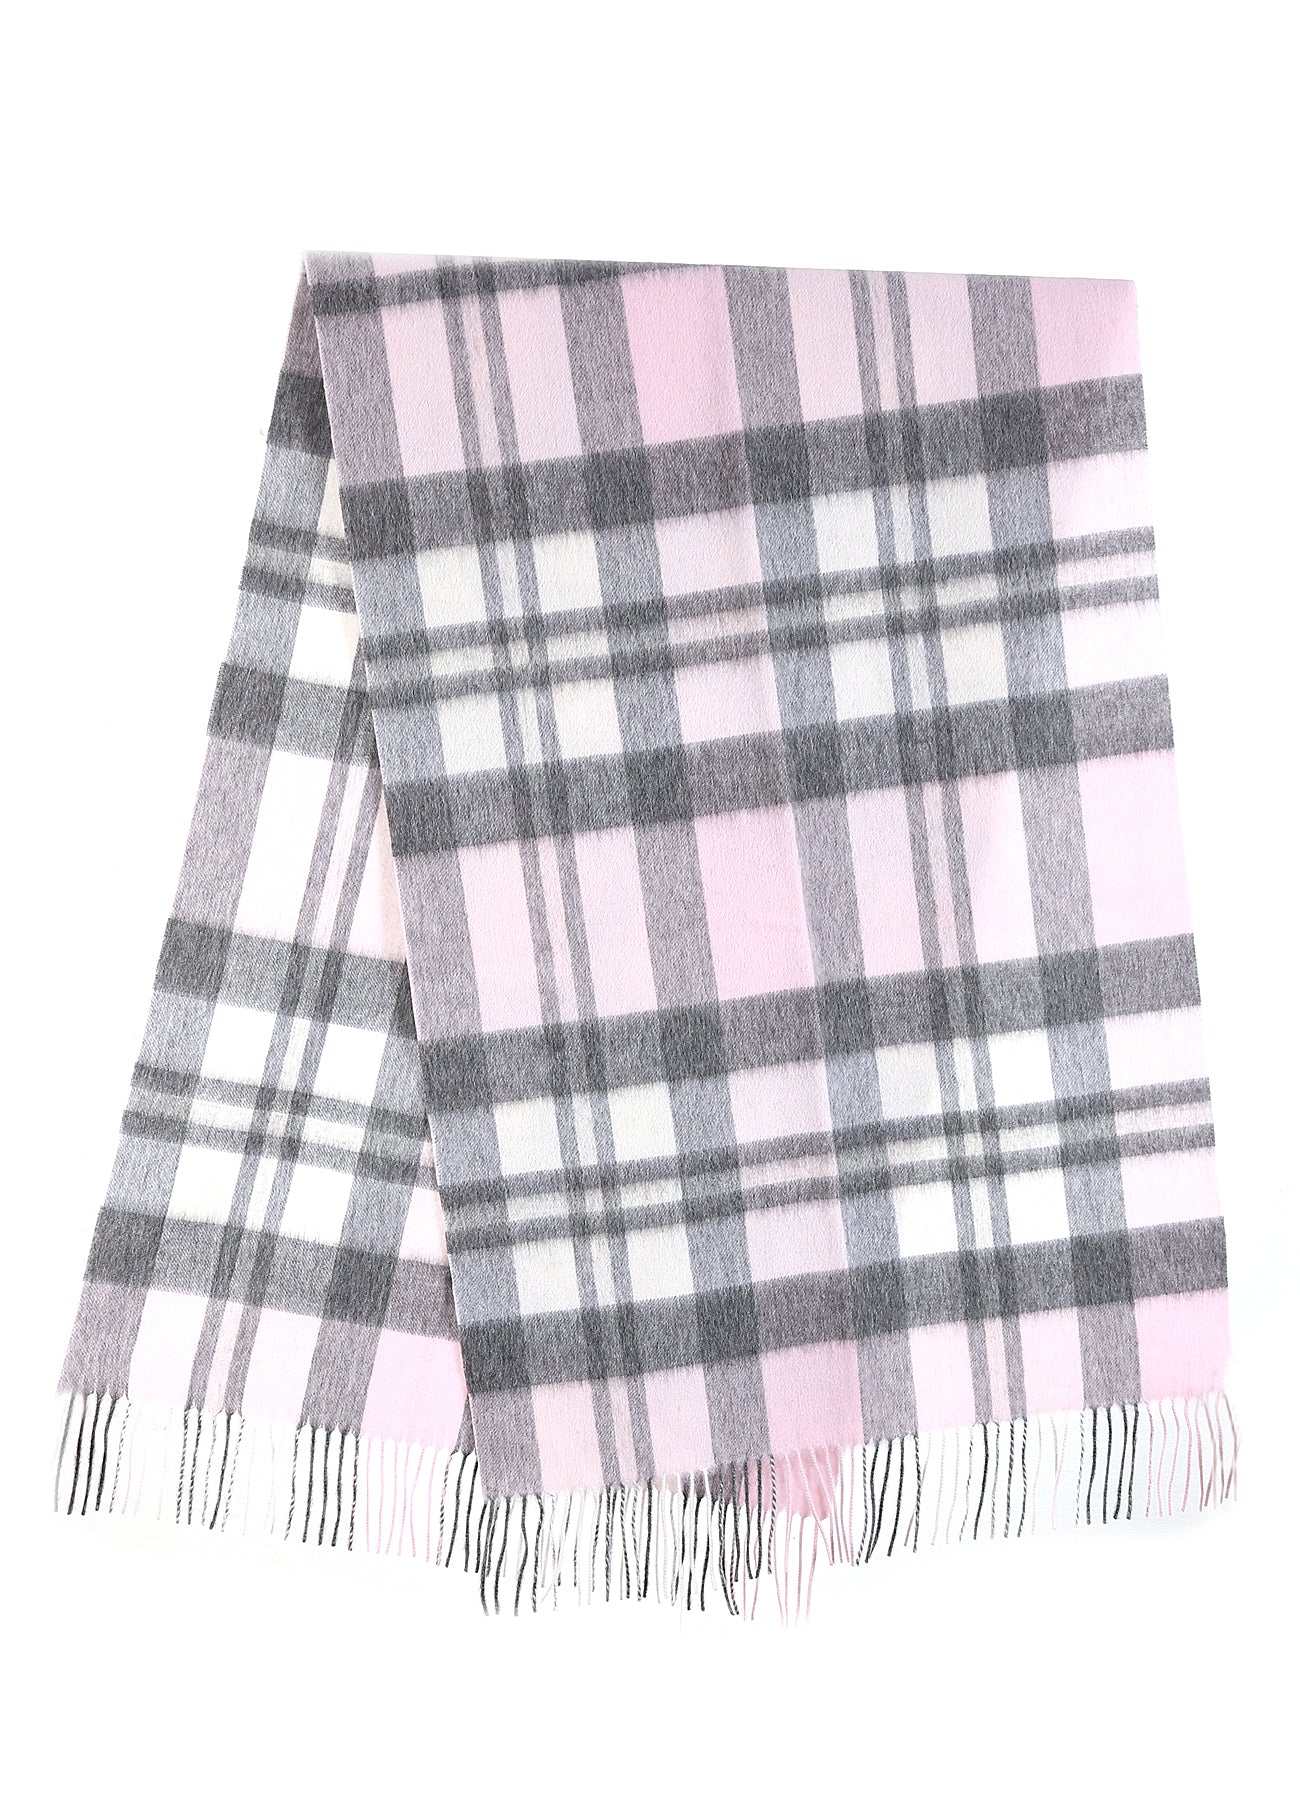 DC Pink Stole 100% Pure Lambswool